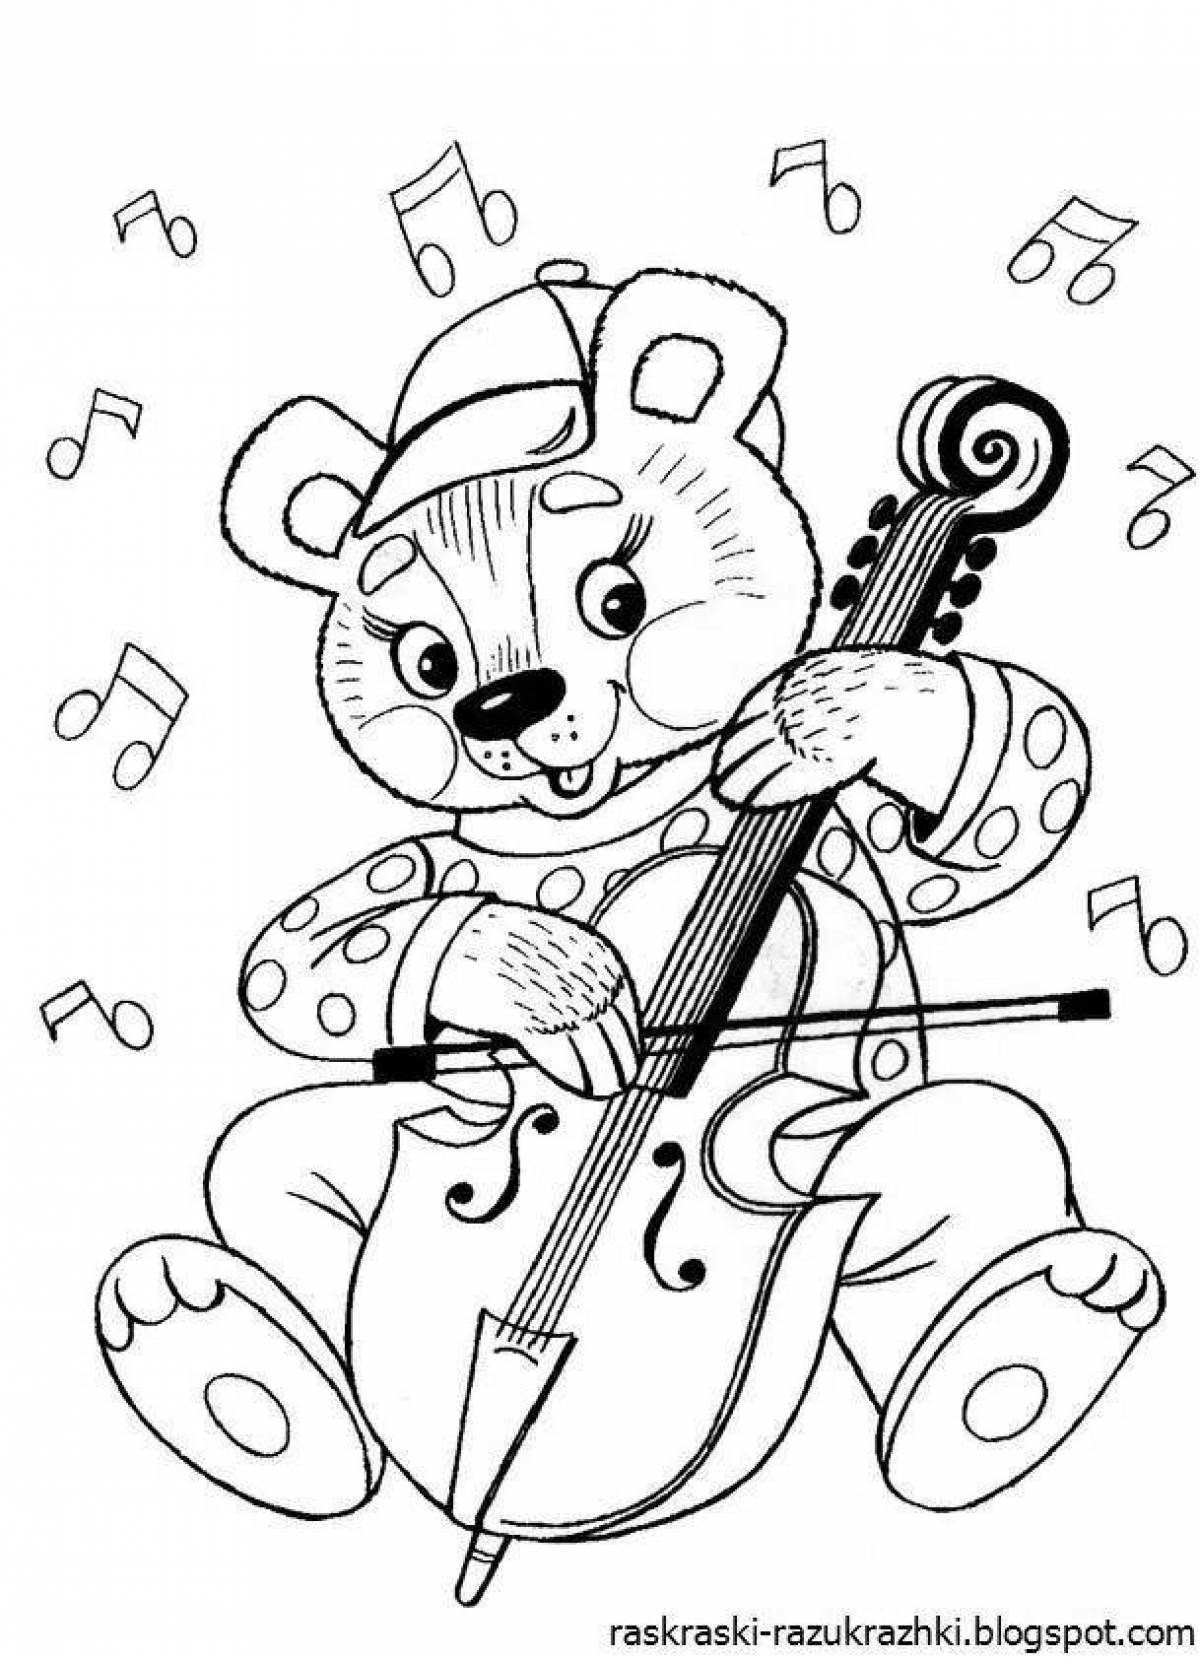 Color-fantastic music coloring page